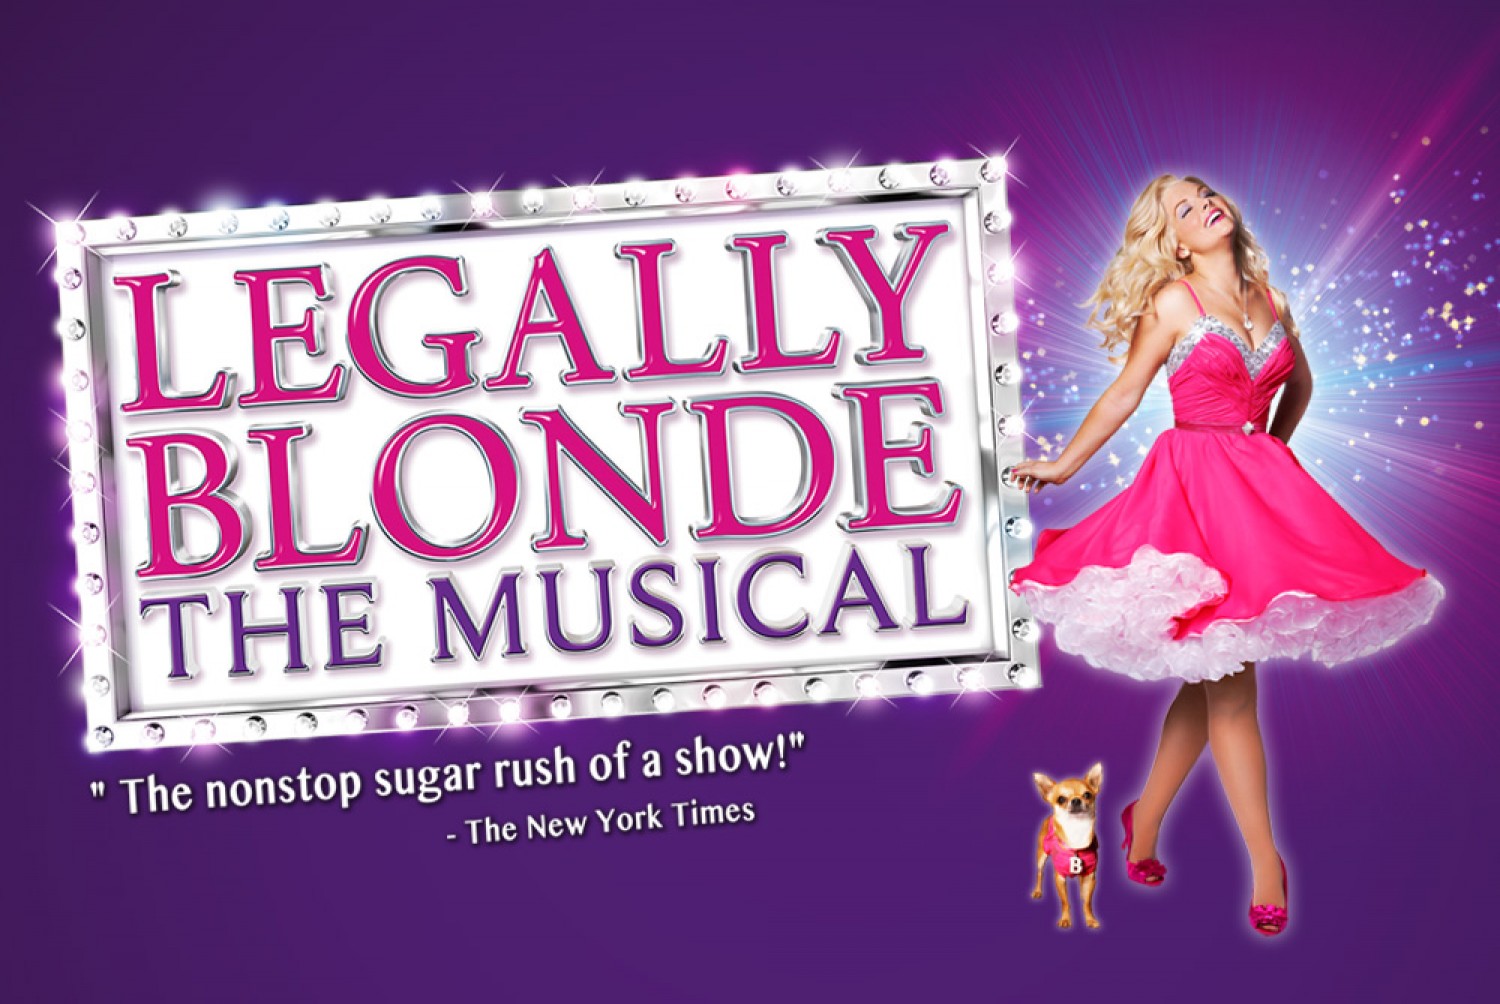 Legally Blonde: The Musical at the Palace Theater